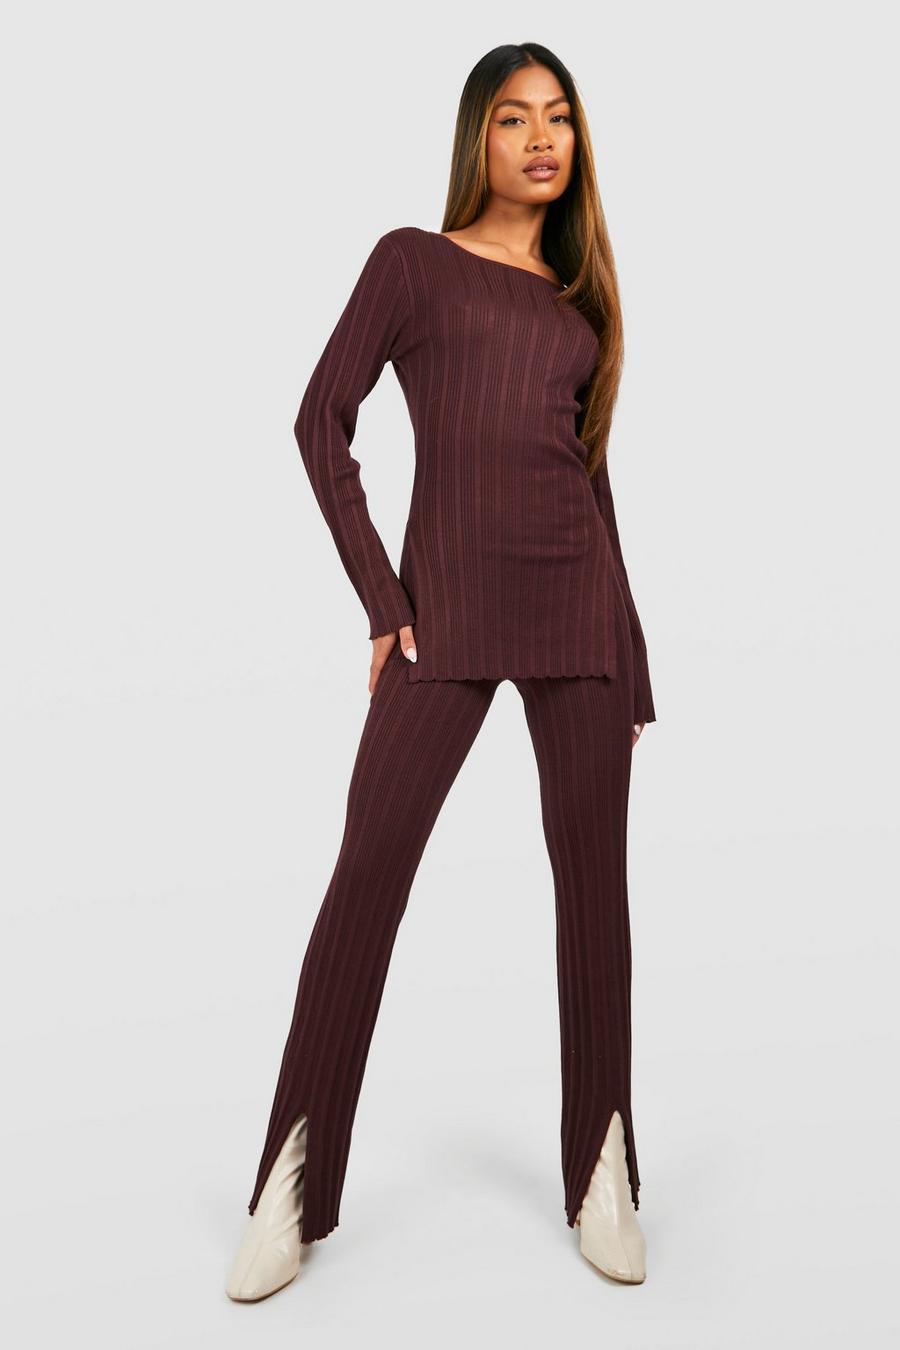 Chocolate Mixed Rib Knitted Co-ord